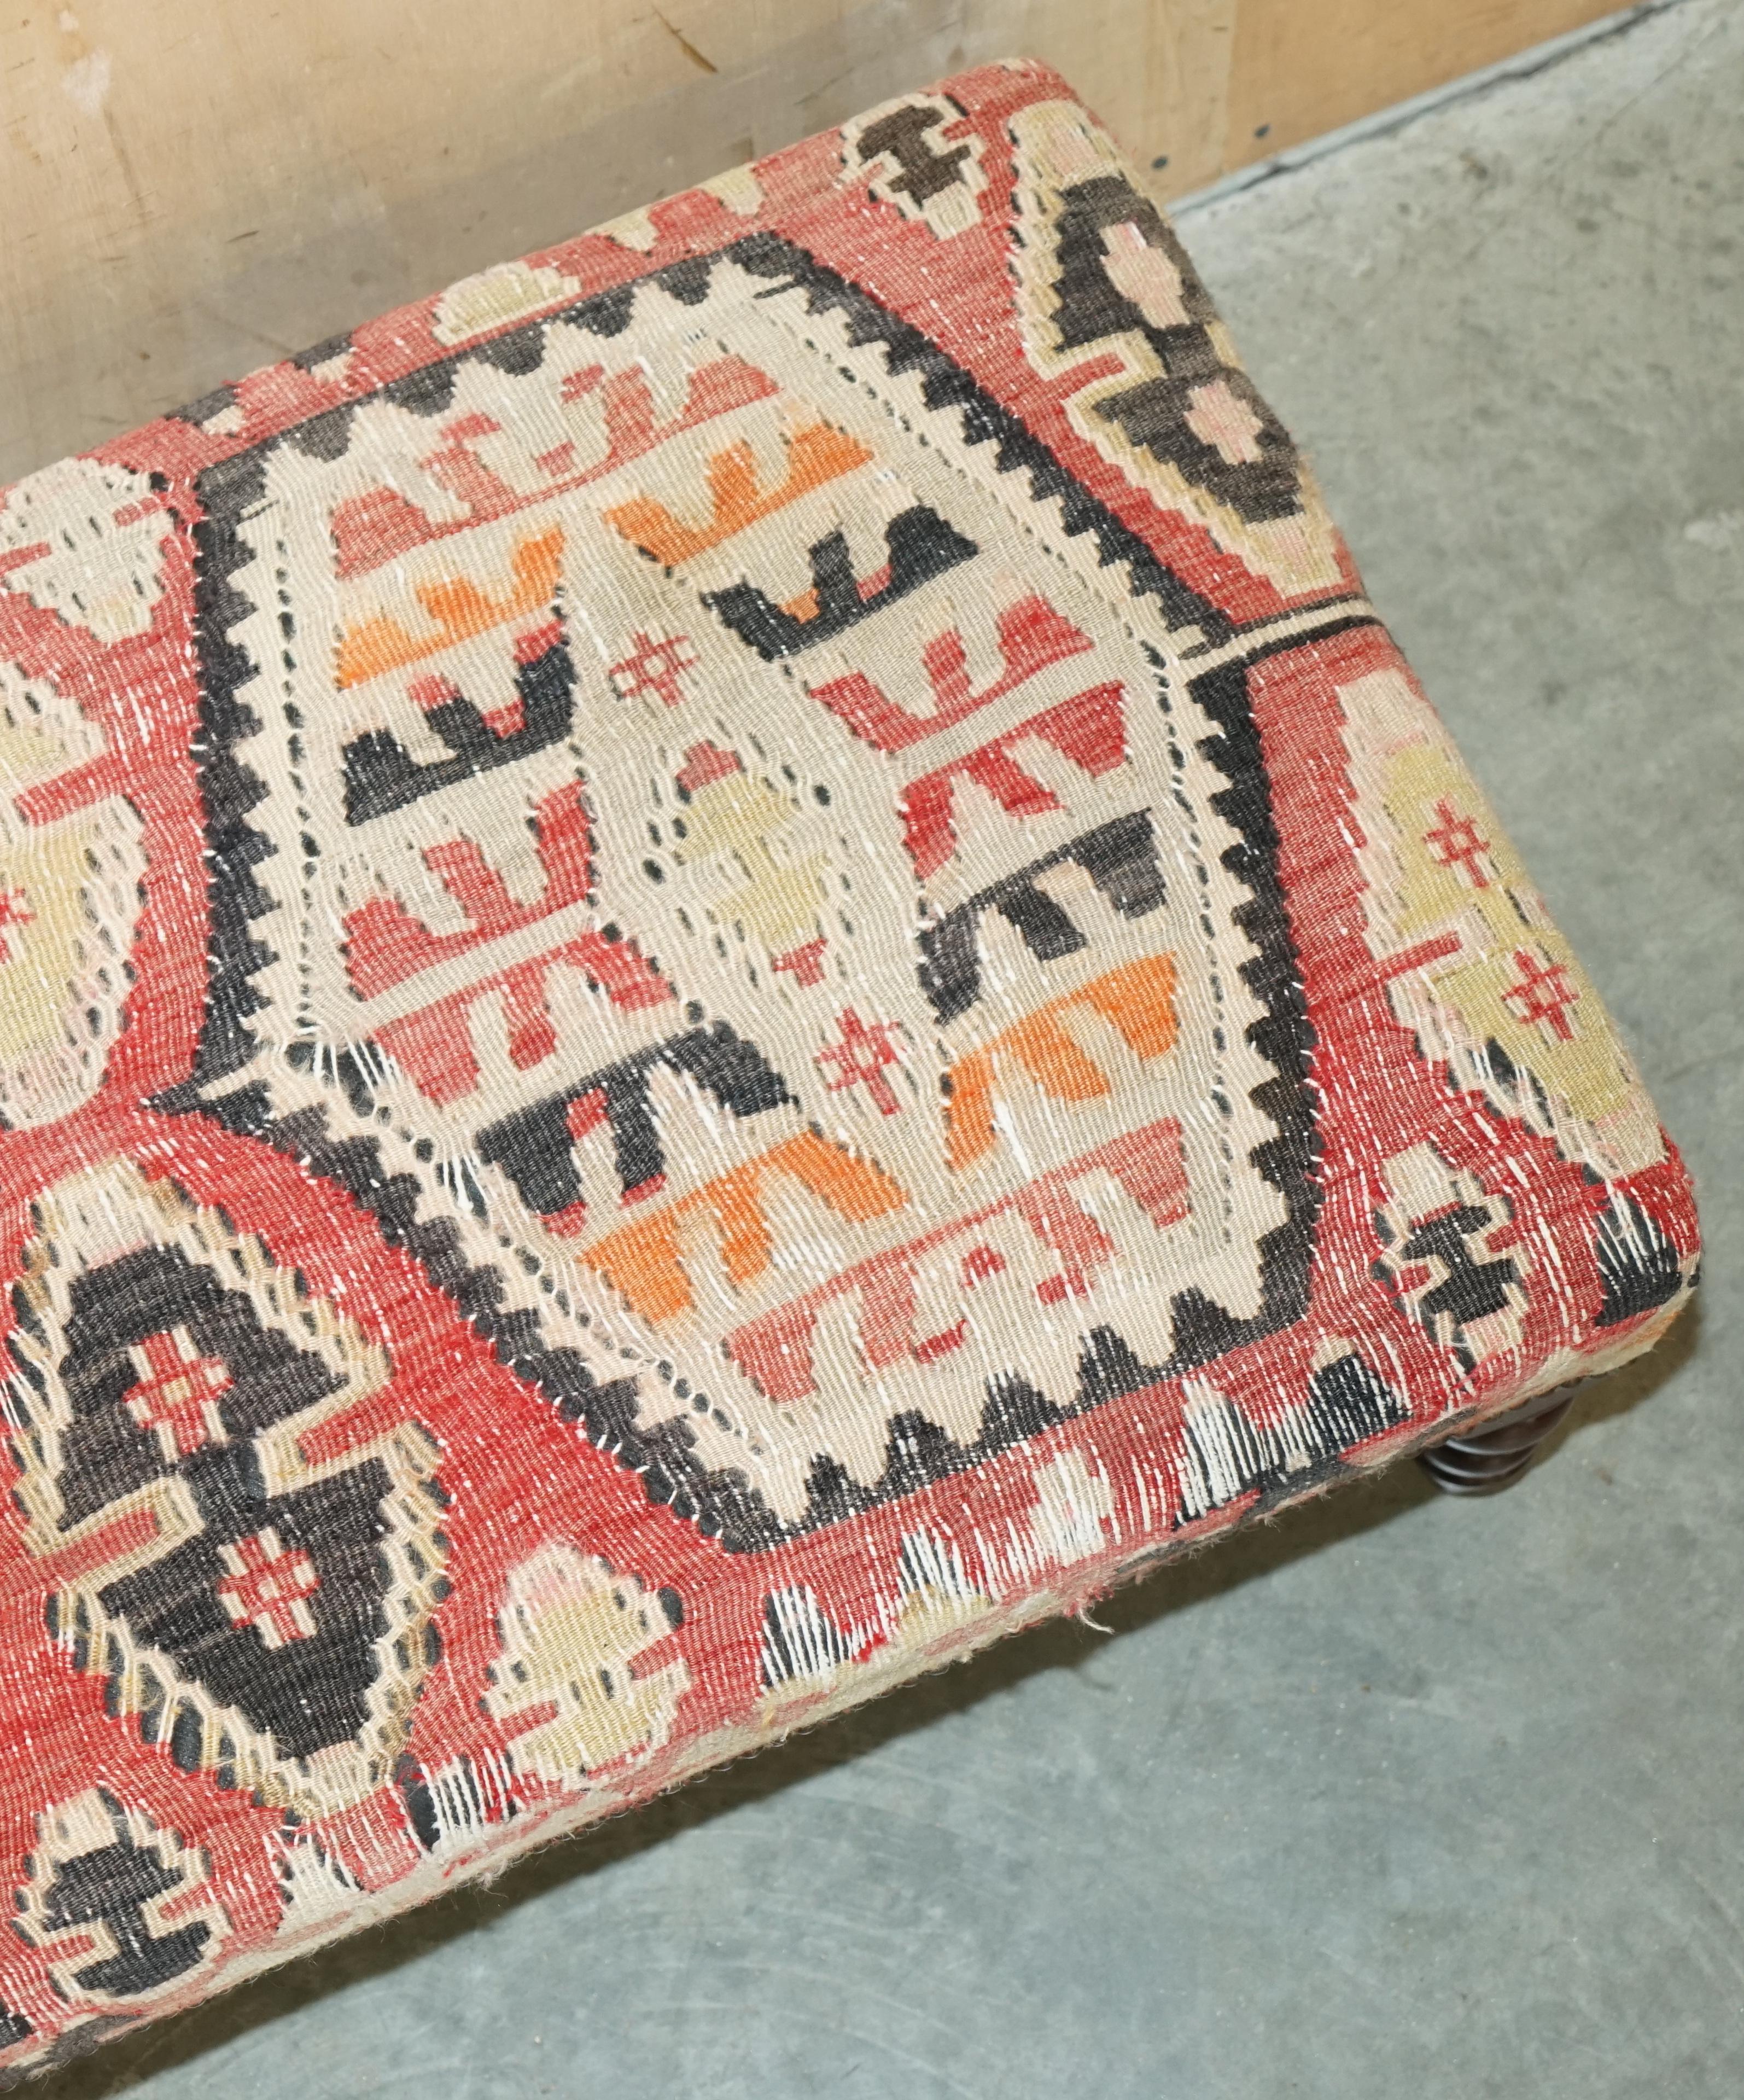 STUNNING AND COLLECTABLE ViNTAGE GEORGE SMITH CHELSEA KILIM FOOTSTOOL OTTOMAN 4